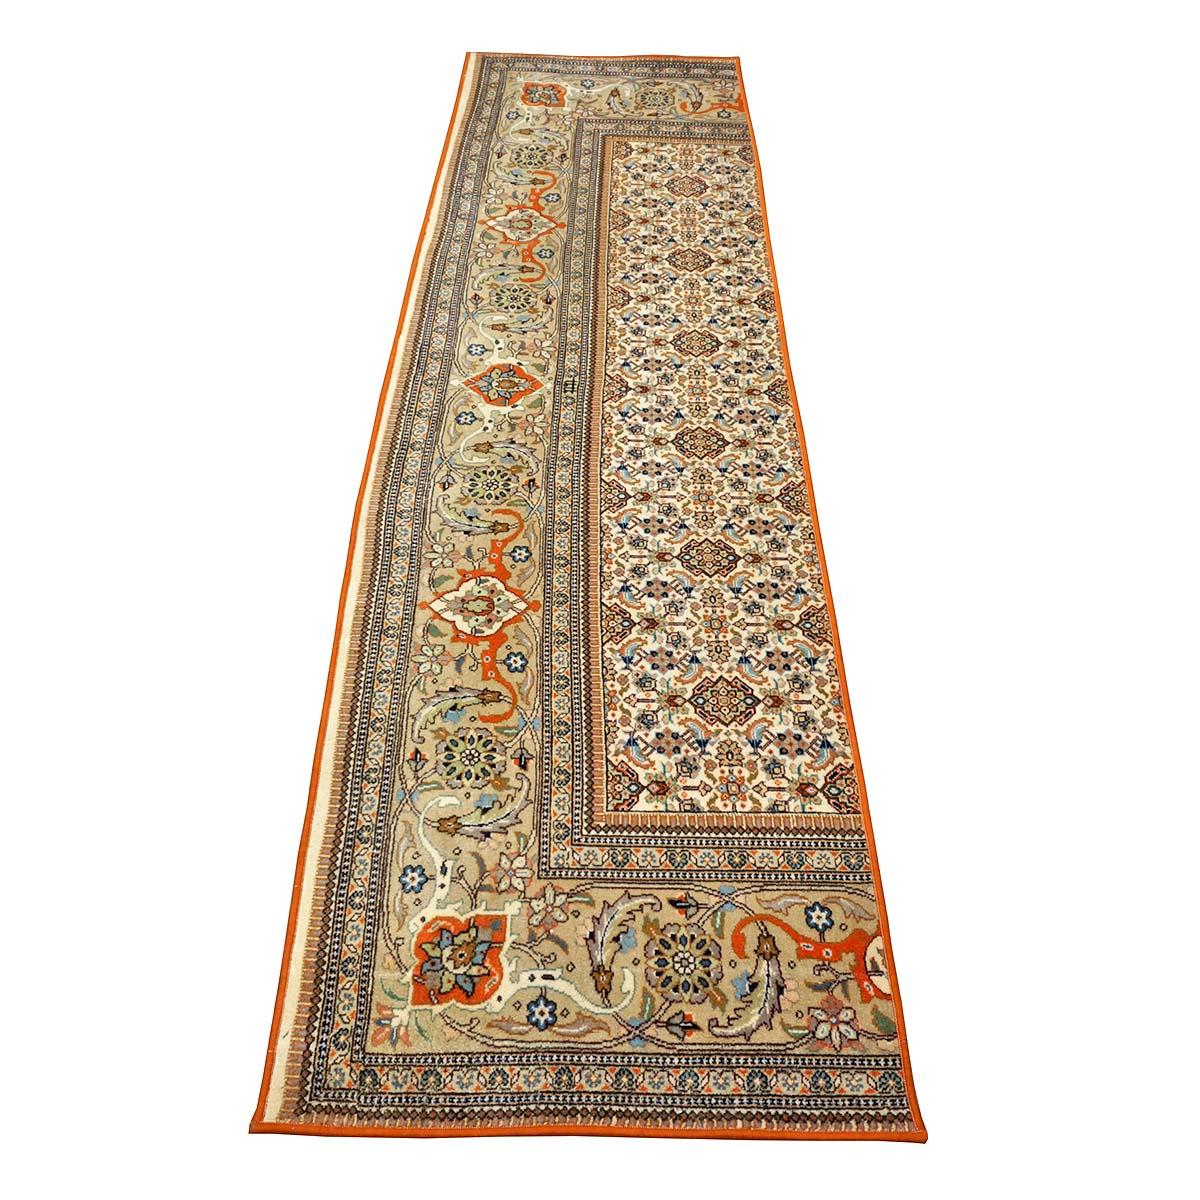 Ashly Fine Rugs presents a 1980s Vintage Persian Tabriz Taba Wool 3x10 Handmade Runner. Tabriz is a northern city in modern-day Iran and has forever been famous for the fineness and craftsmanship of its handmade rugs. This runner, along with 3